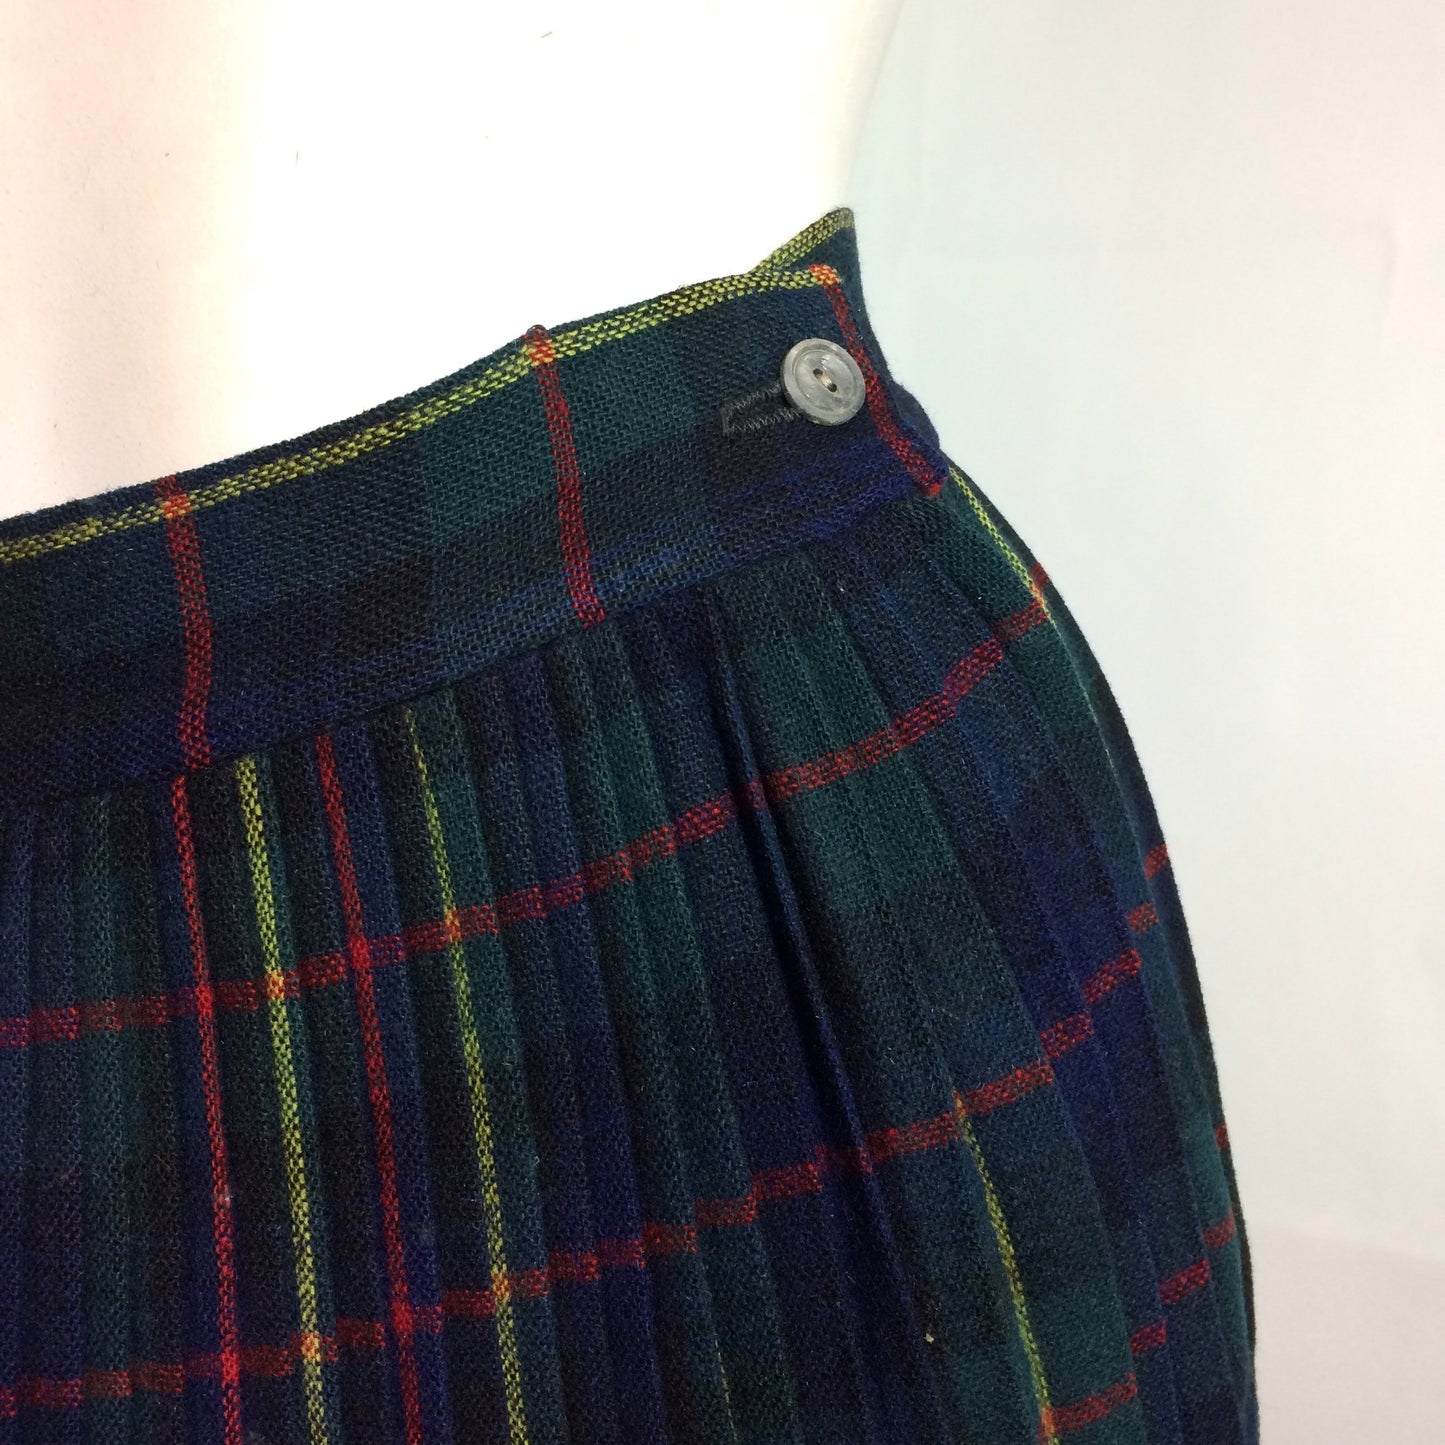 Preppy Blue and Green Plaid Wool Pleated Skirt circa 1940s